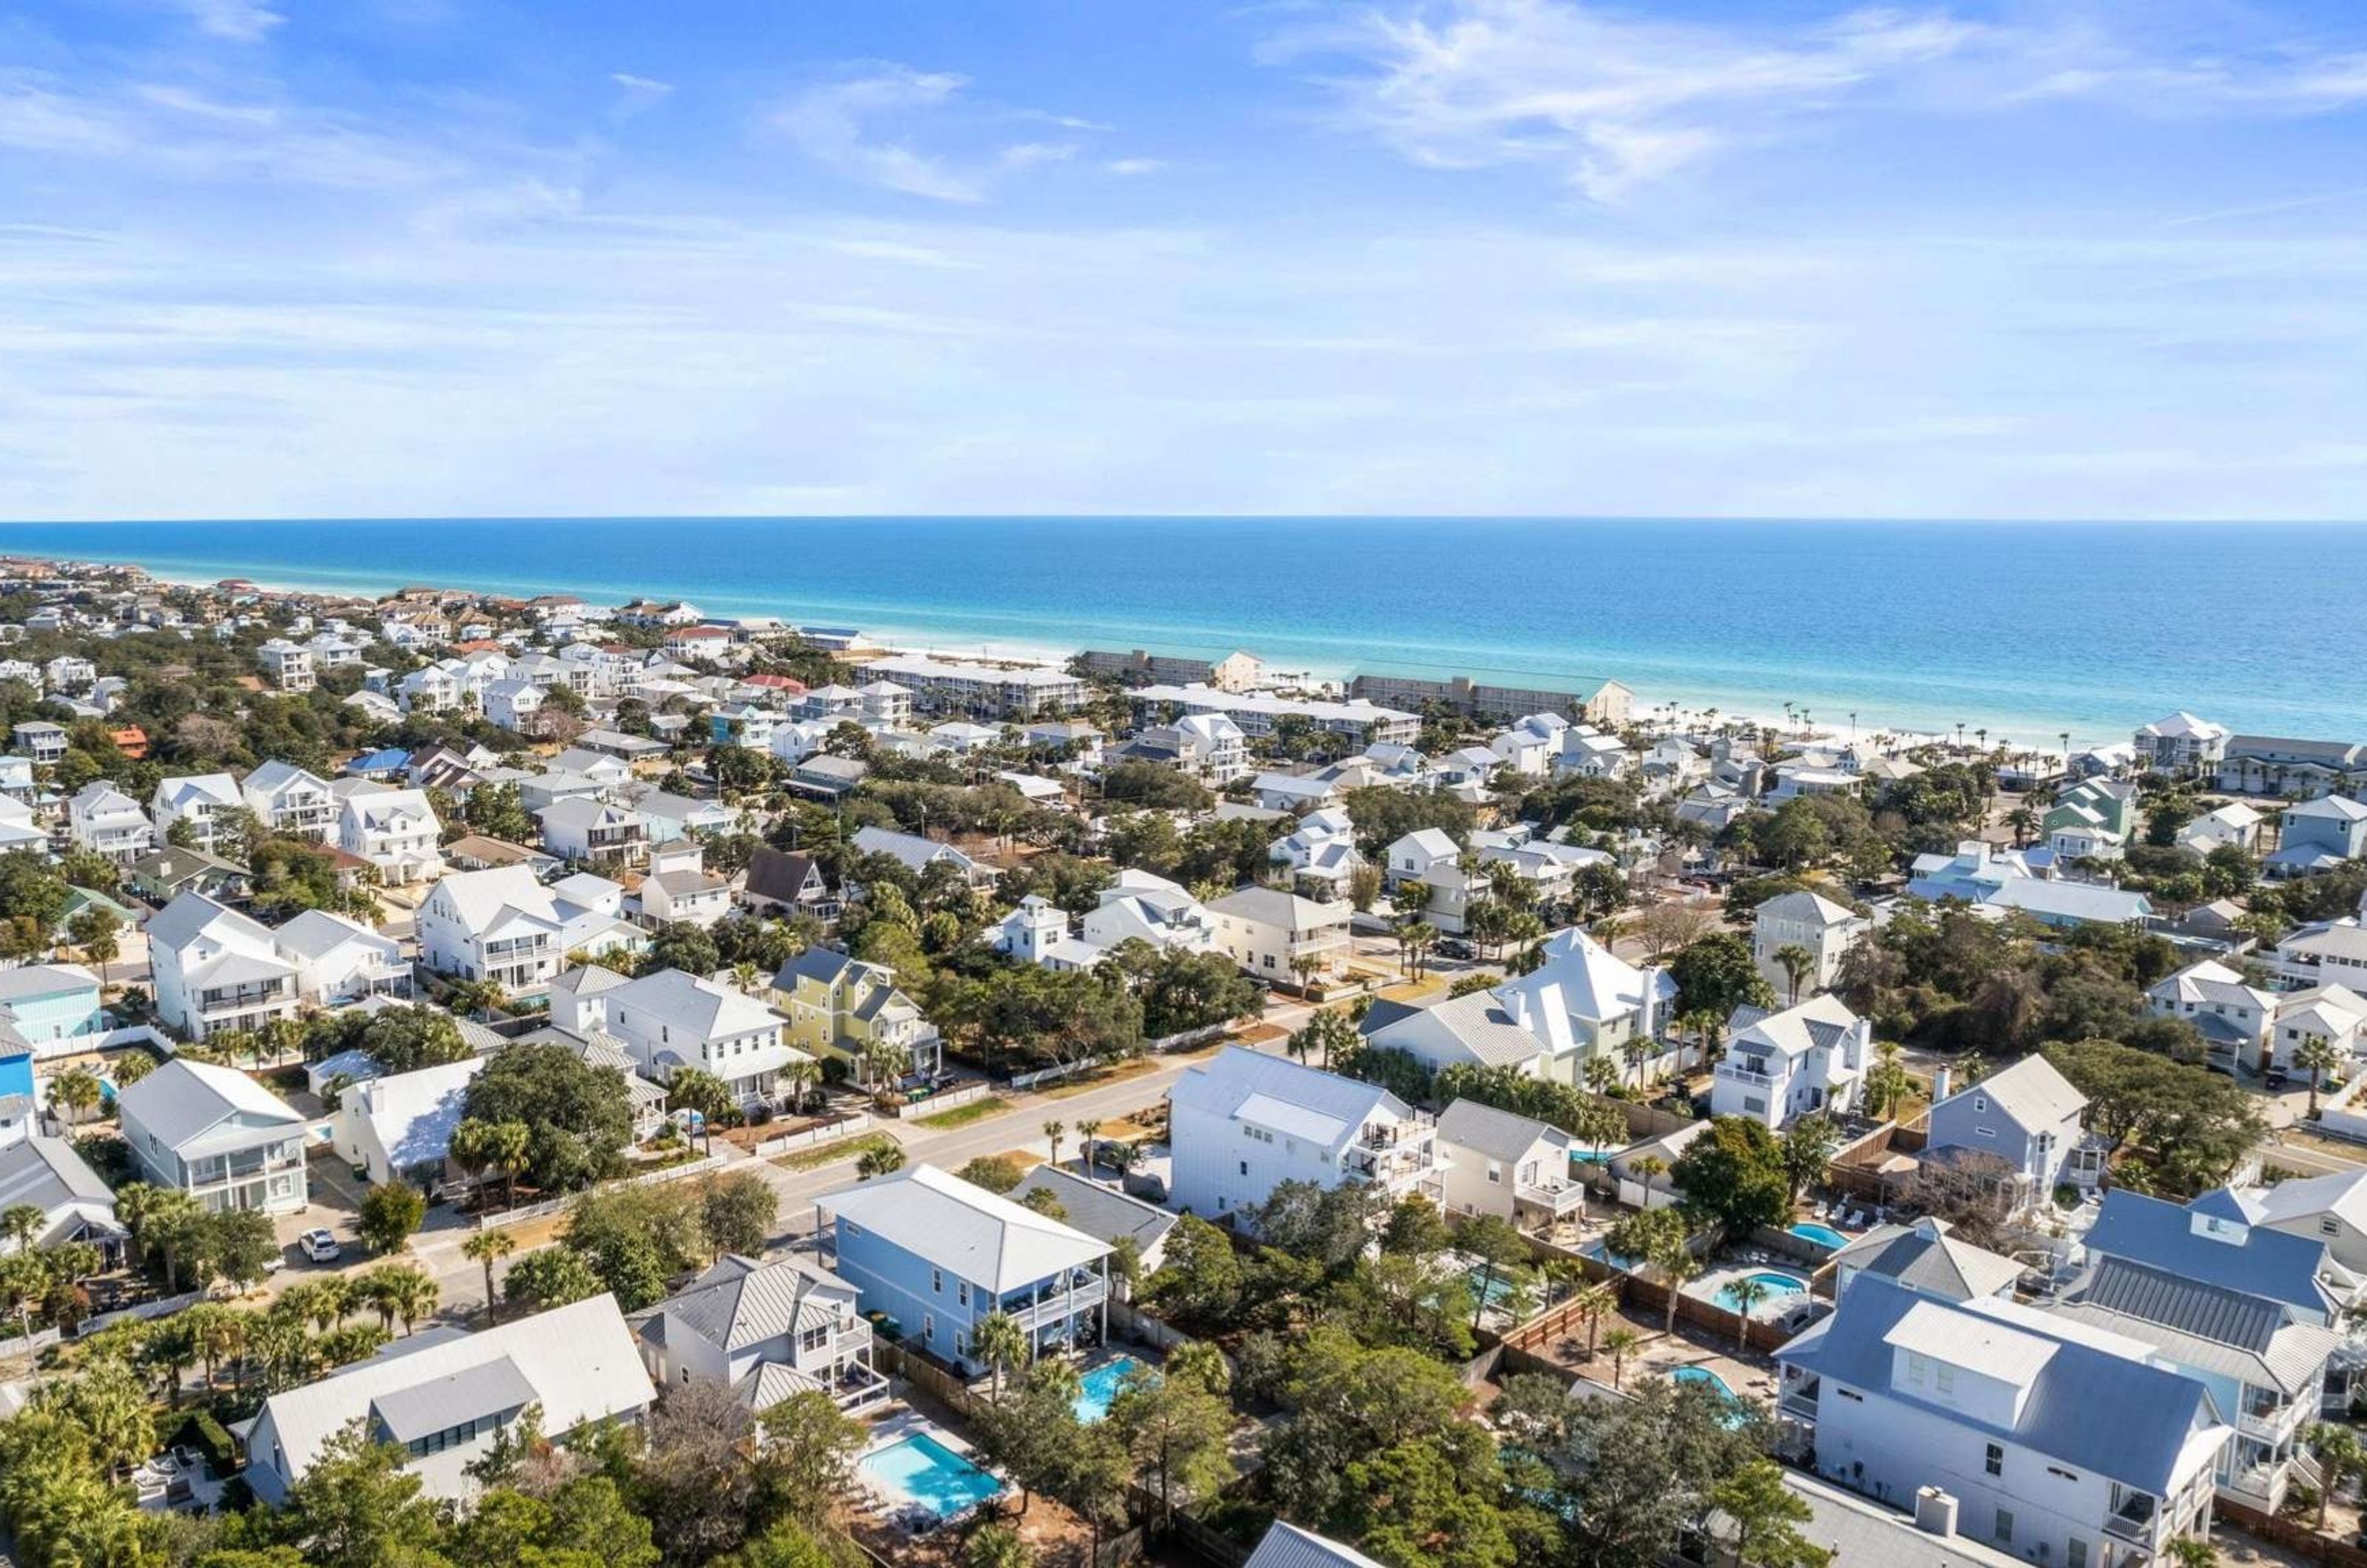 Aerial view of houses in Destin Florida with the Gulf of Mexico in the background 